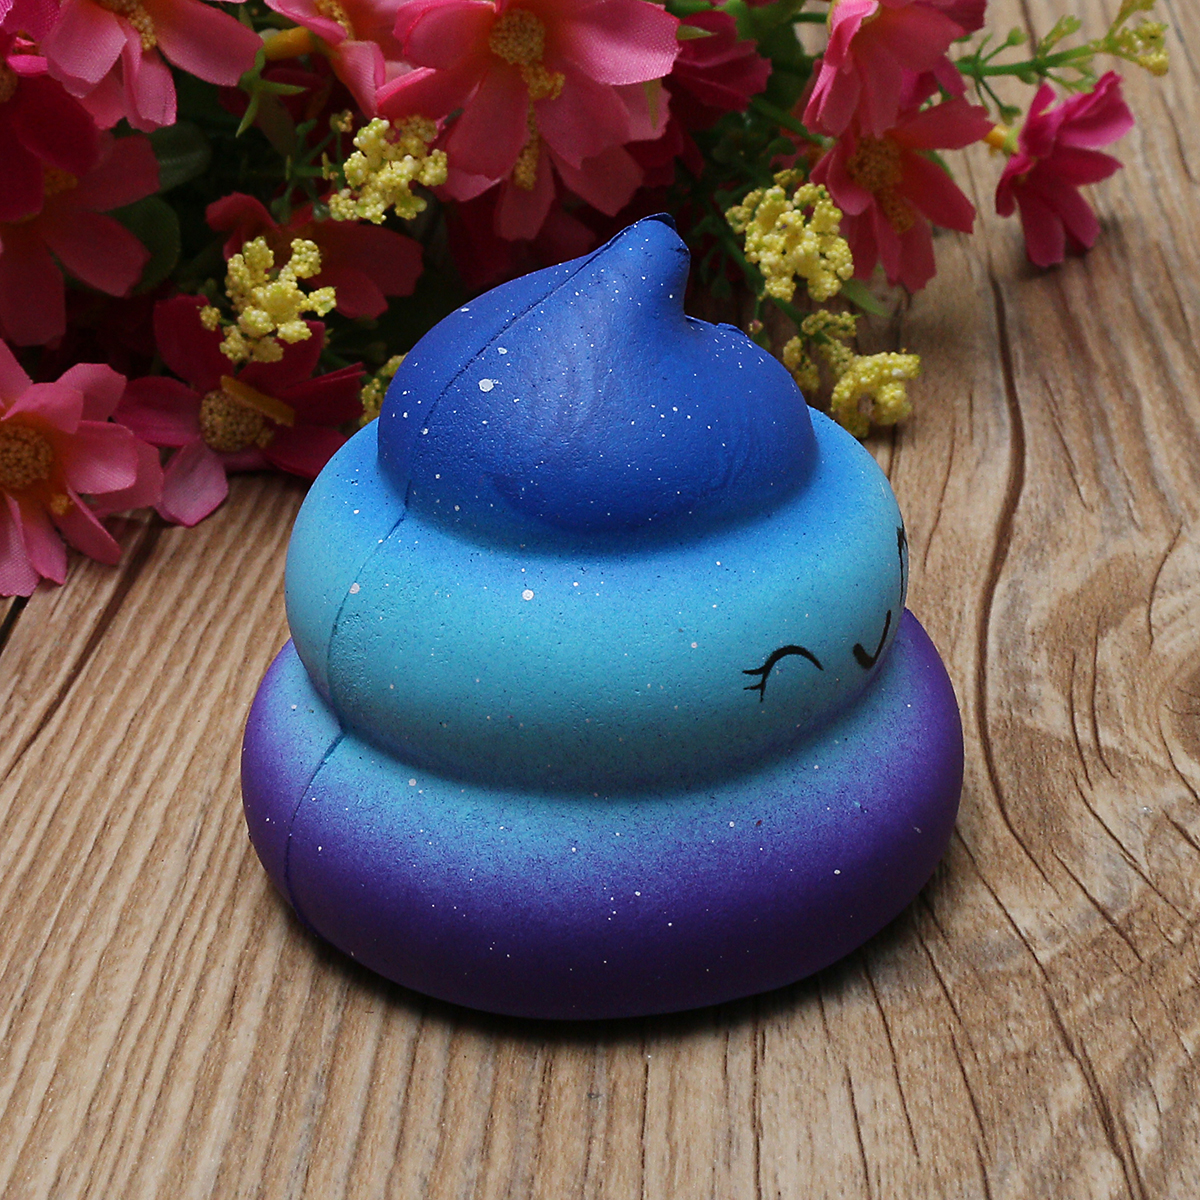 Squishy-Galaxy-Poo-Squishy-Hand-Pillow-65CM-Slow-Rising-With-Packaging-Collection-Gift-Decor-Toy-1311228-10